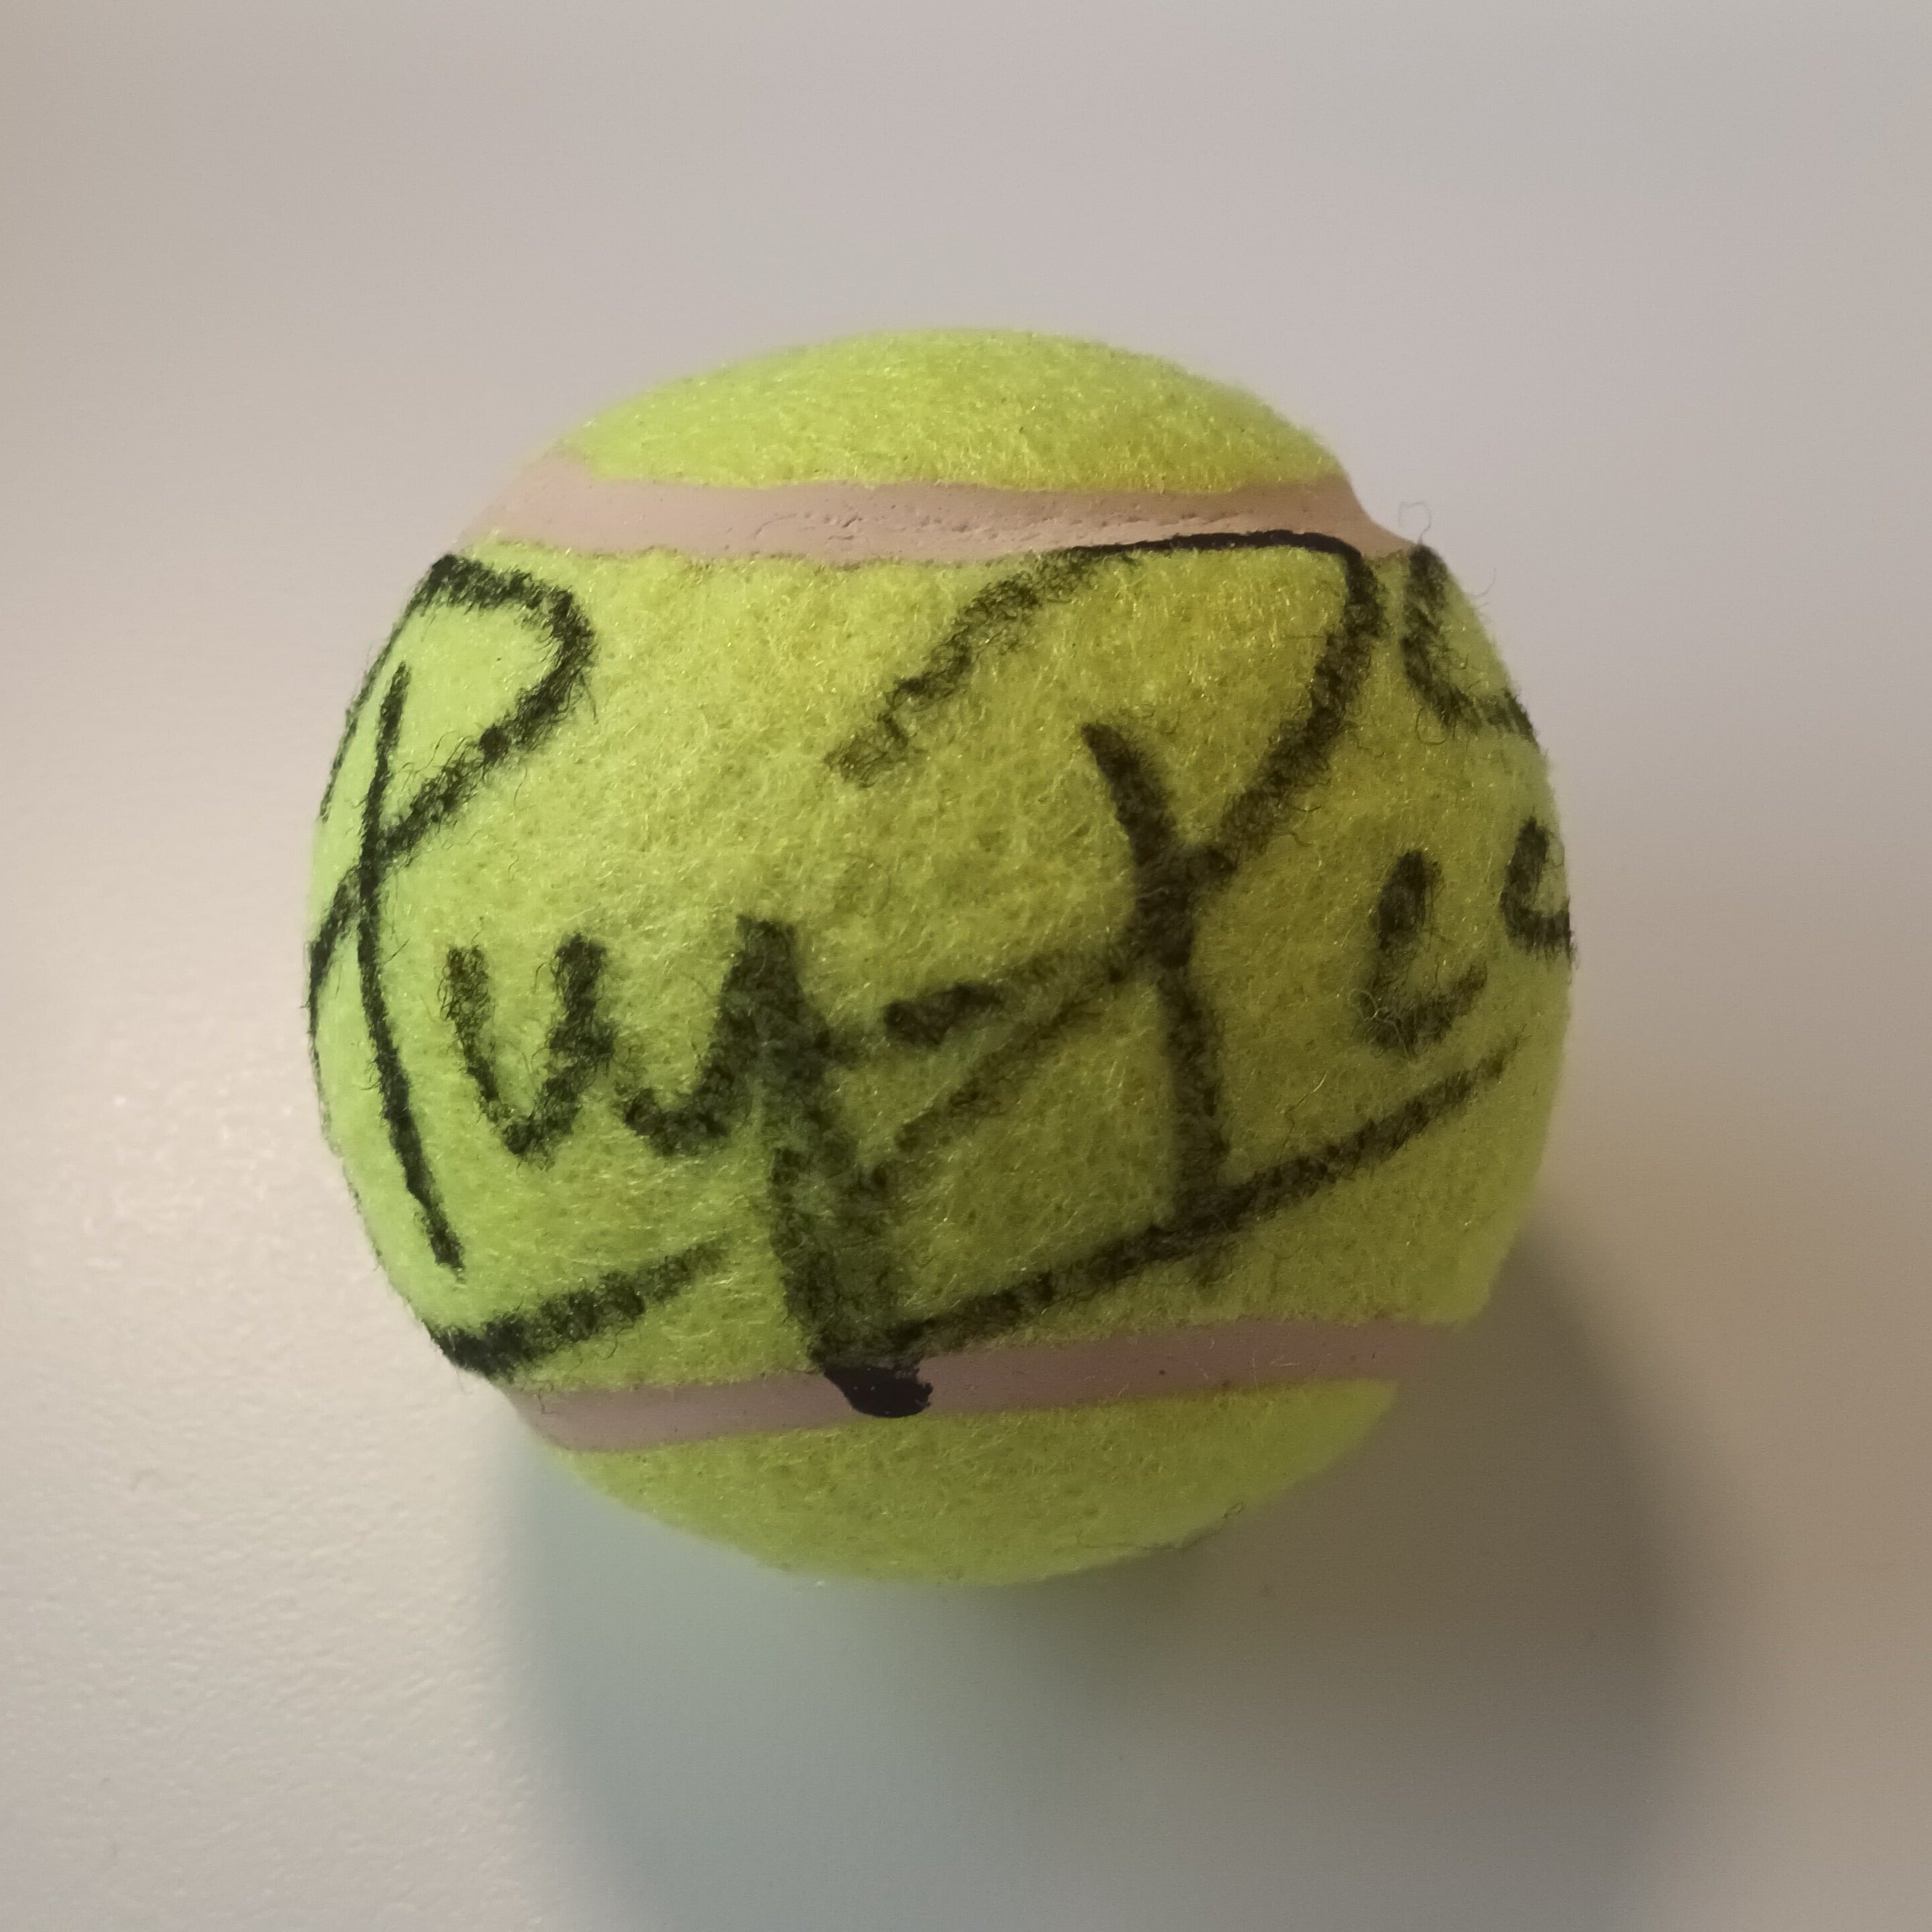 A trio of regular-size tennis balls, signed separately by the 